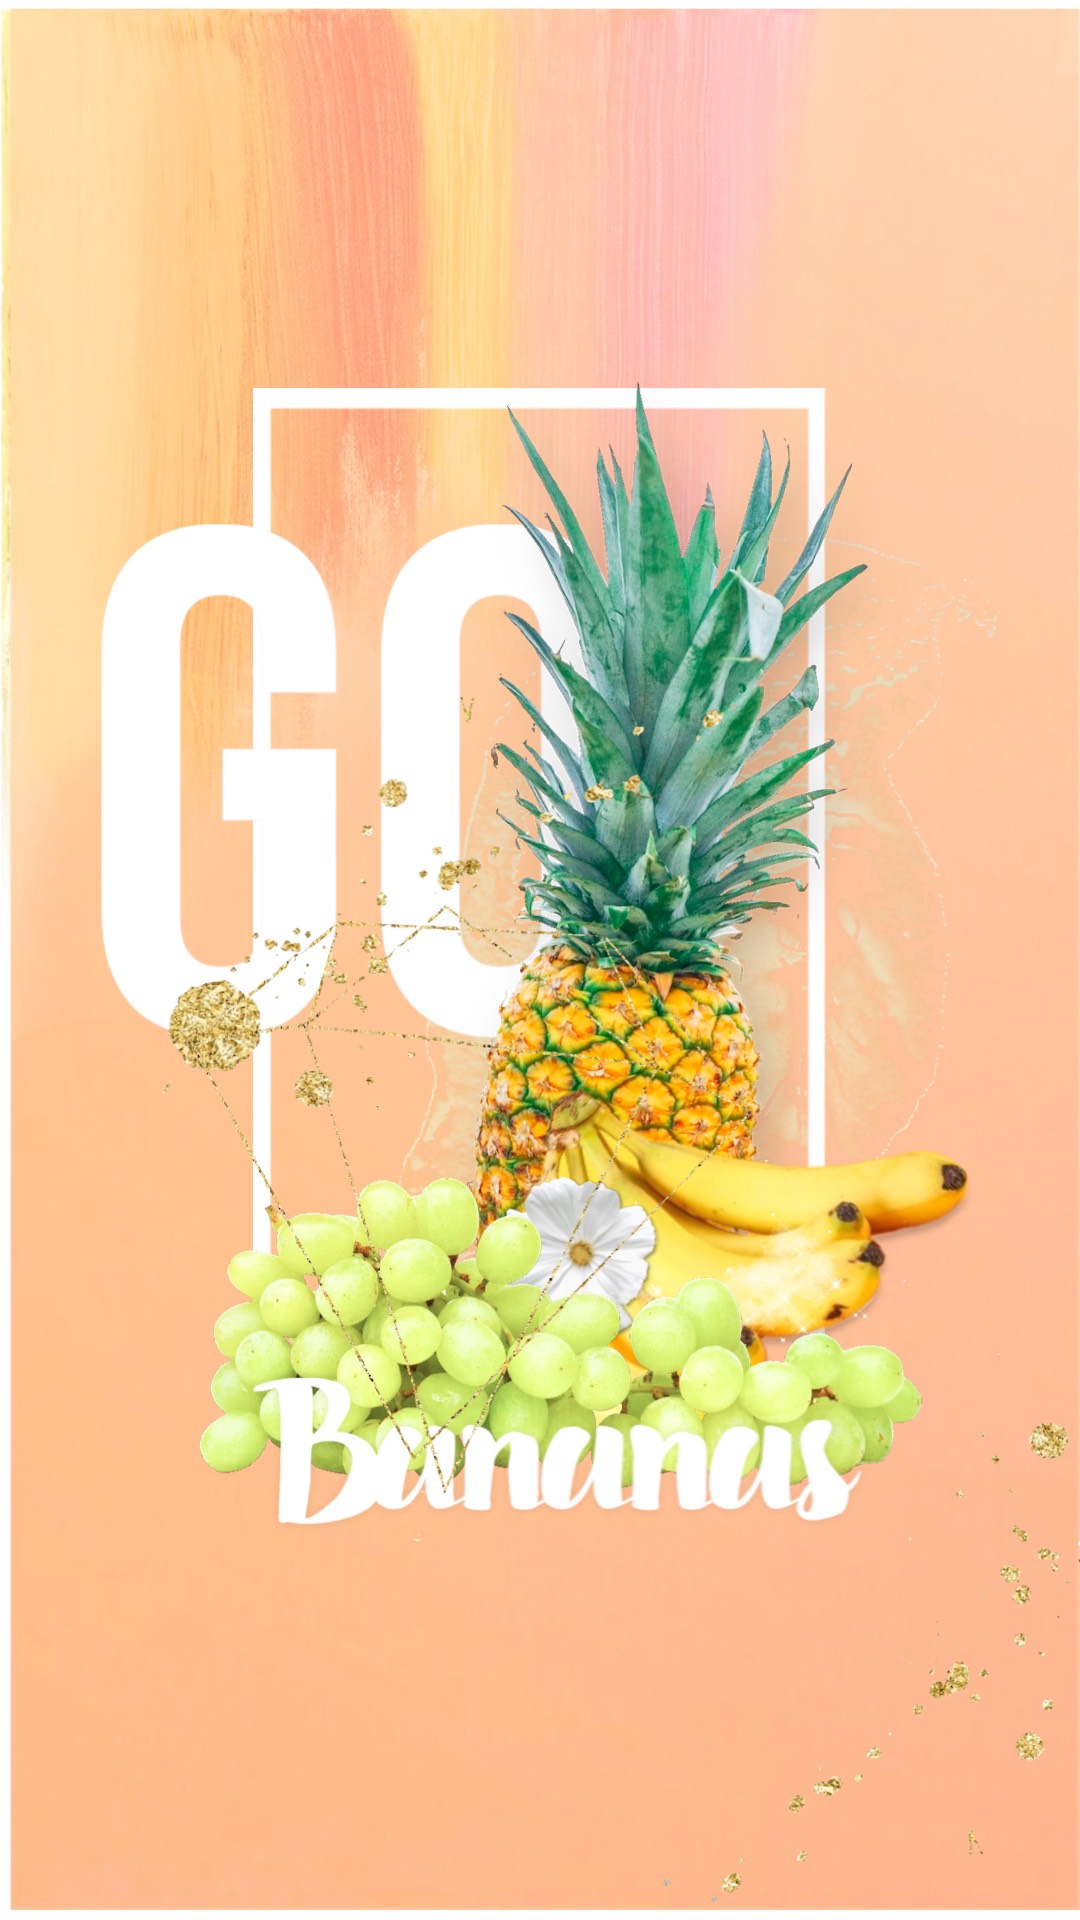 Go summer pineapple banana and grapes story template